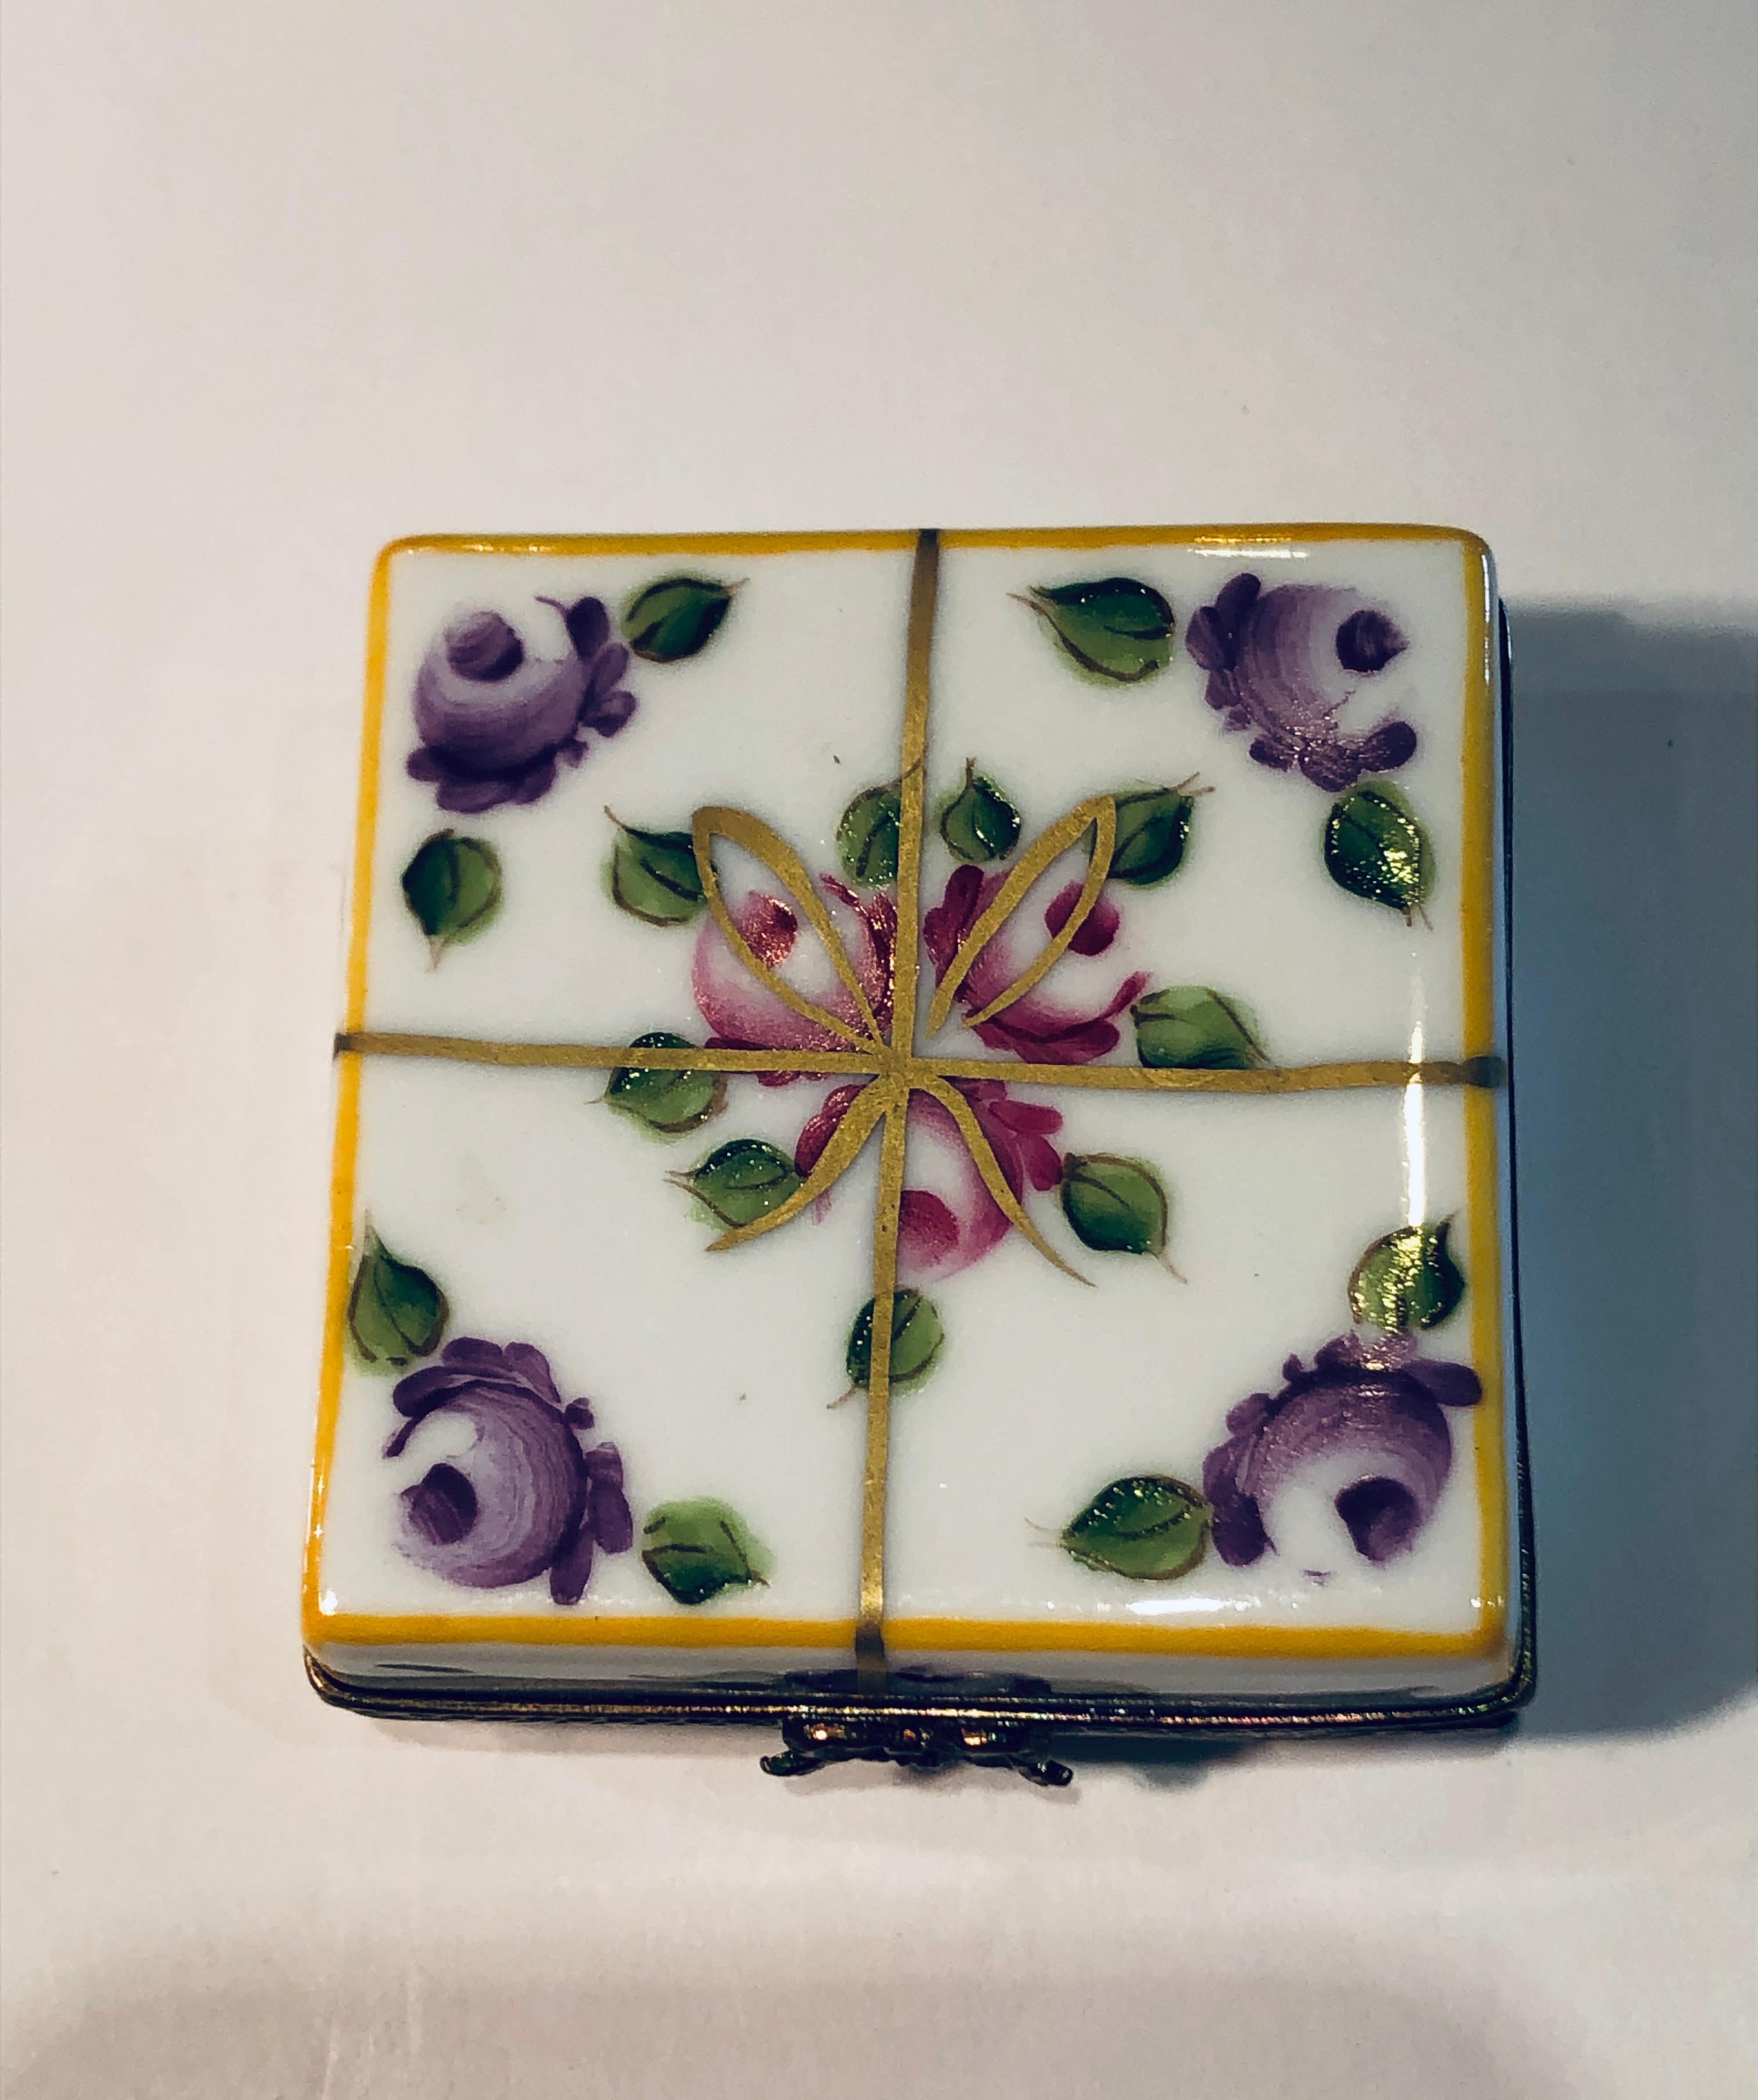 Collectible, limited edition Limoges porcelain miniature trinket box is handmade and hand painted with colorful roses, green leaves and a cheerful yellow border. It depicts a beautiful gift wrapped present which is tied with a painted, 24 karat gold